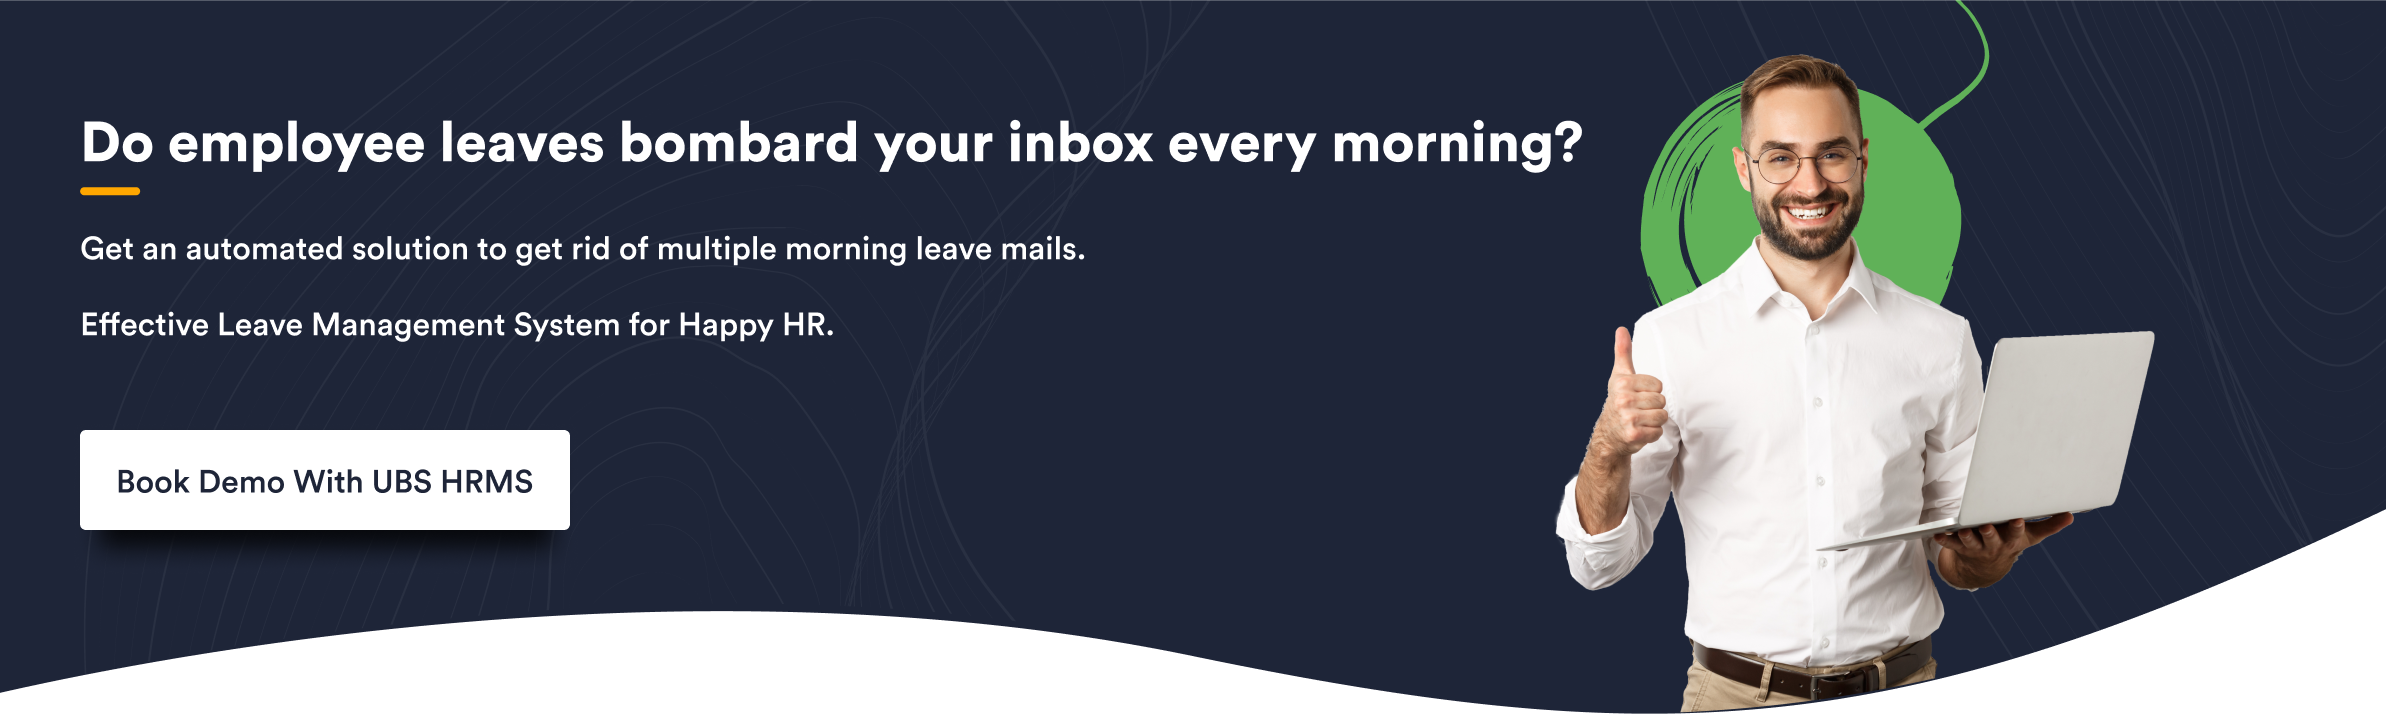 Do employee leaves bombard your inbox every morning